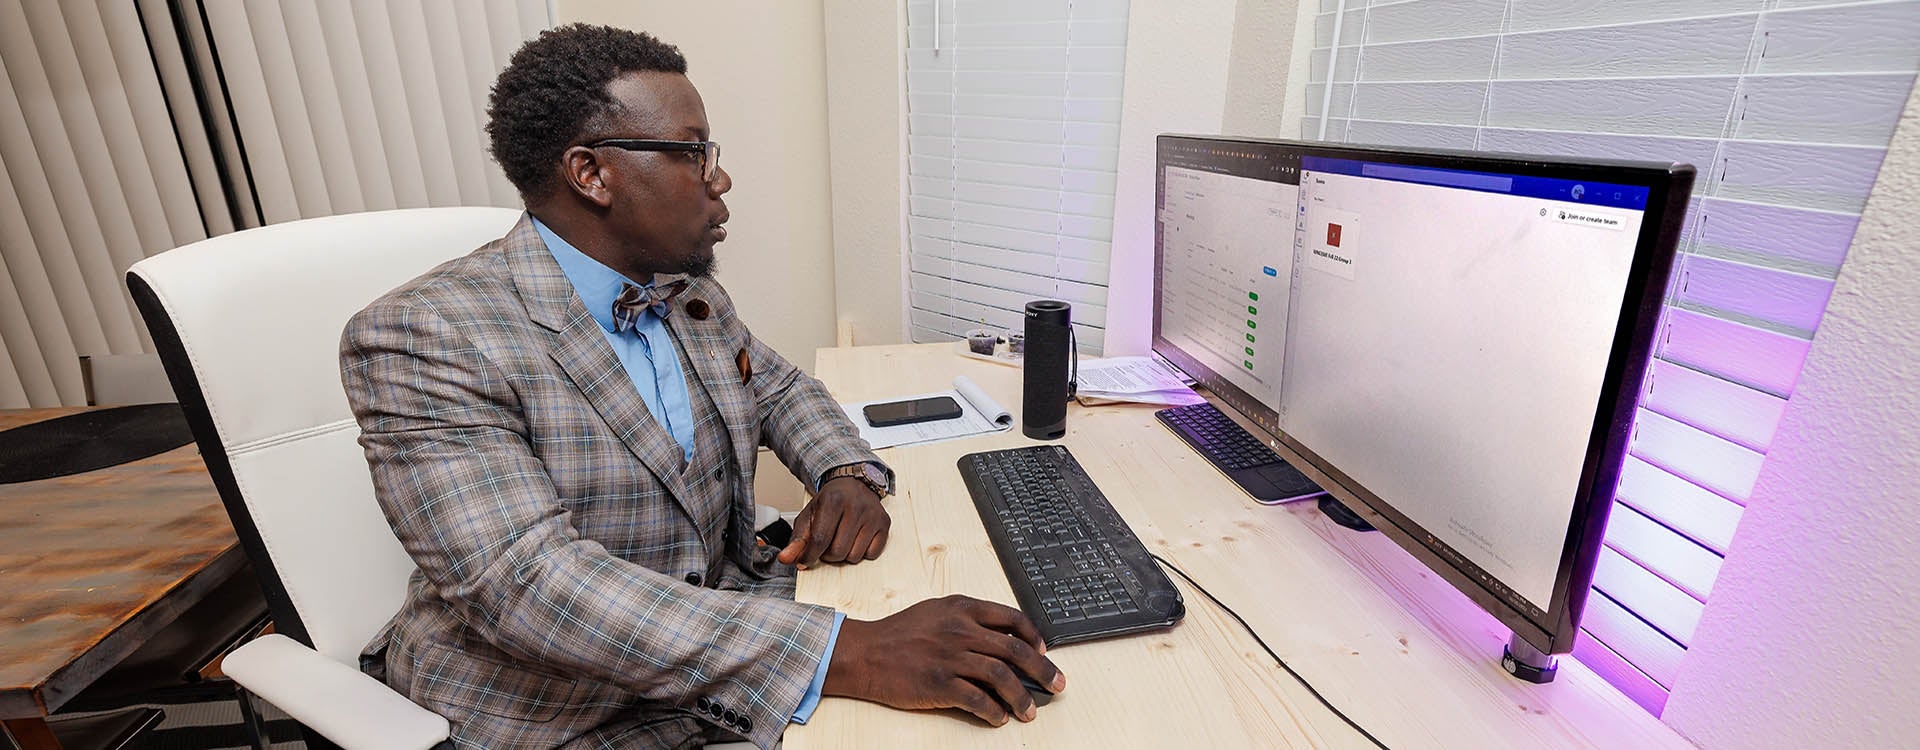 Byron Ohanjo, a Charlotte resident, takes classes as part of ECU's Bachelor of Science in Industrial Technology program online. He said the program met his needs for an accredited, online academic program that fit into his budget. (Photo by Cliff Hollis)